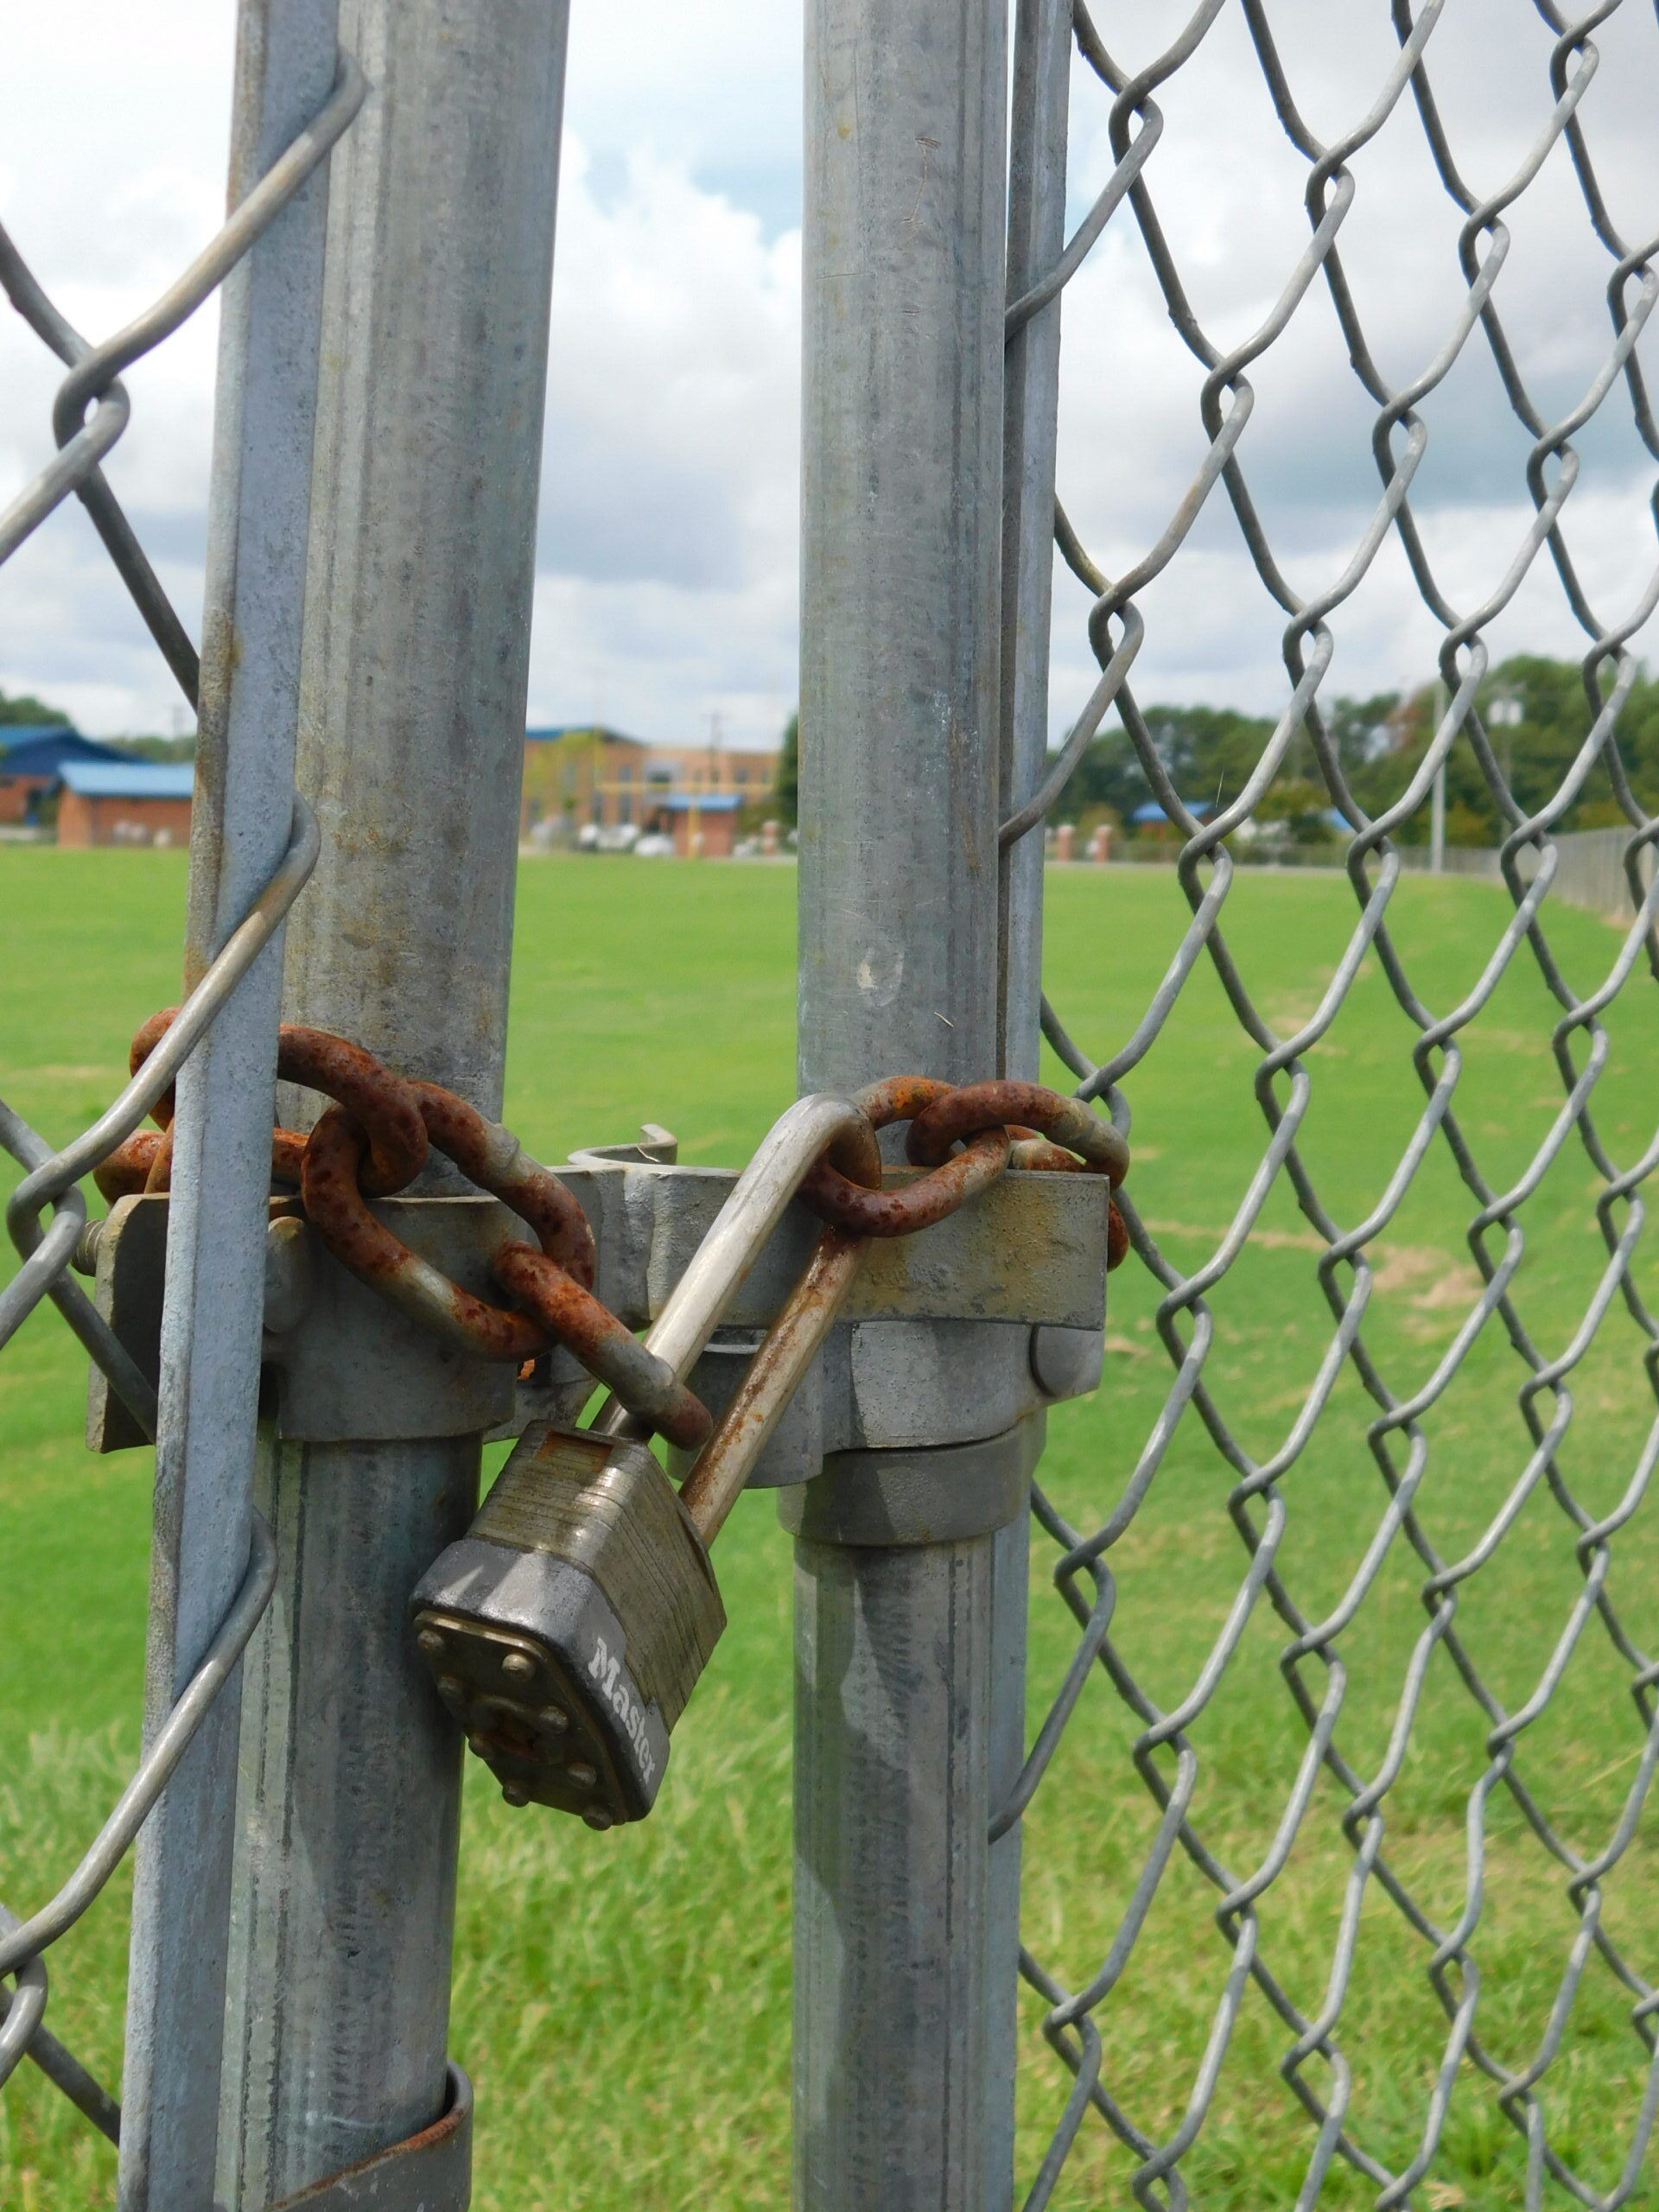 locked gates to a soccer field